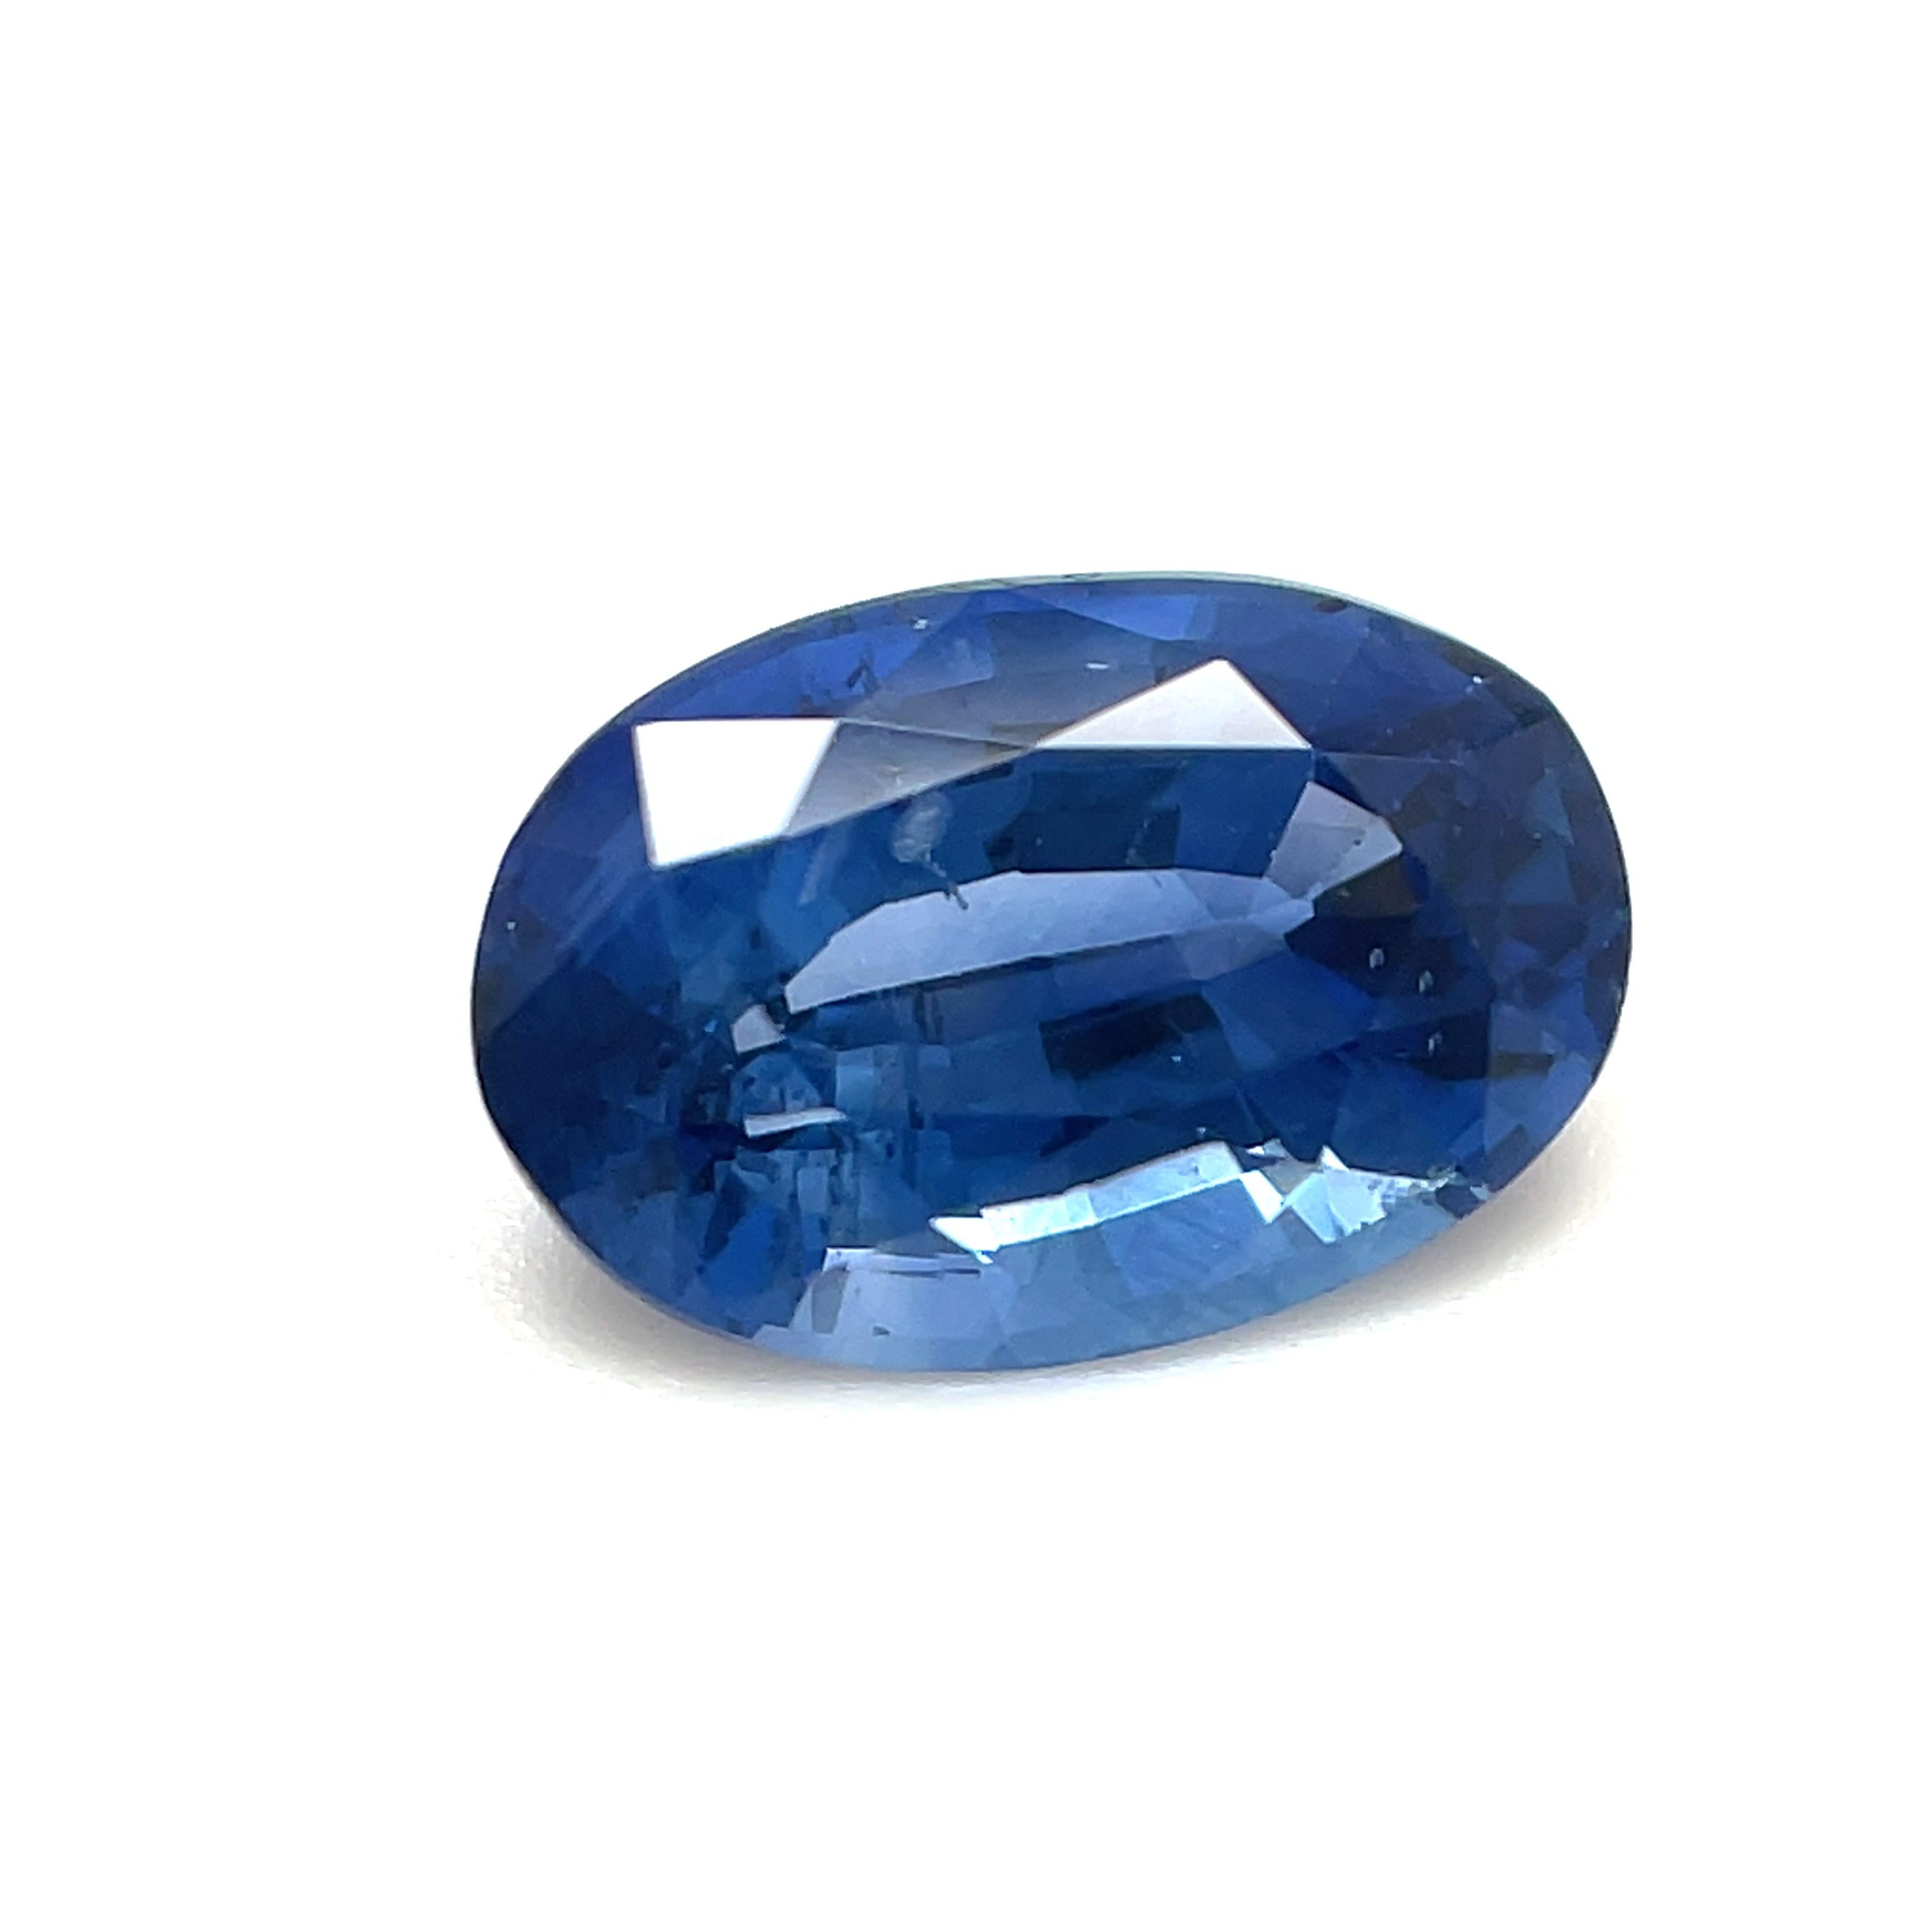 This pretty blue sapphire oval would make a beautiful engagement ring! Weighing 2.00 carats with crisp, medium blue color, this gemstone is nicely proportioned and bright, with both royal and brilliant powder blue highlights! Its slightly elongated